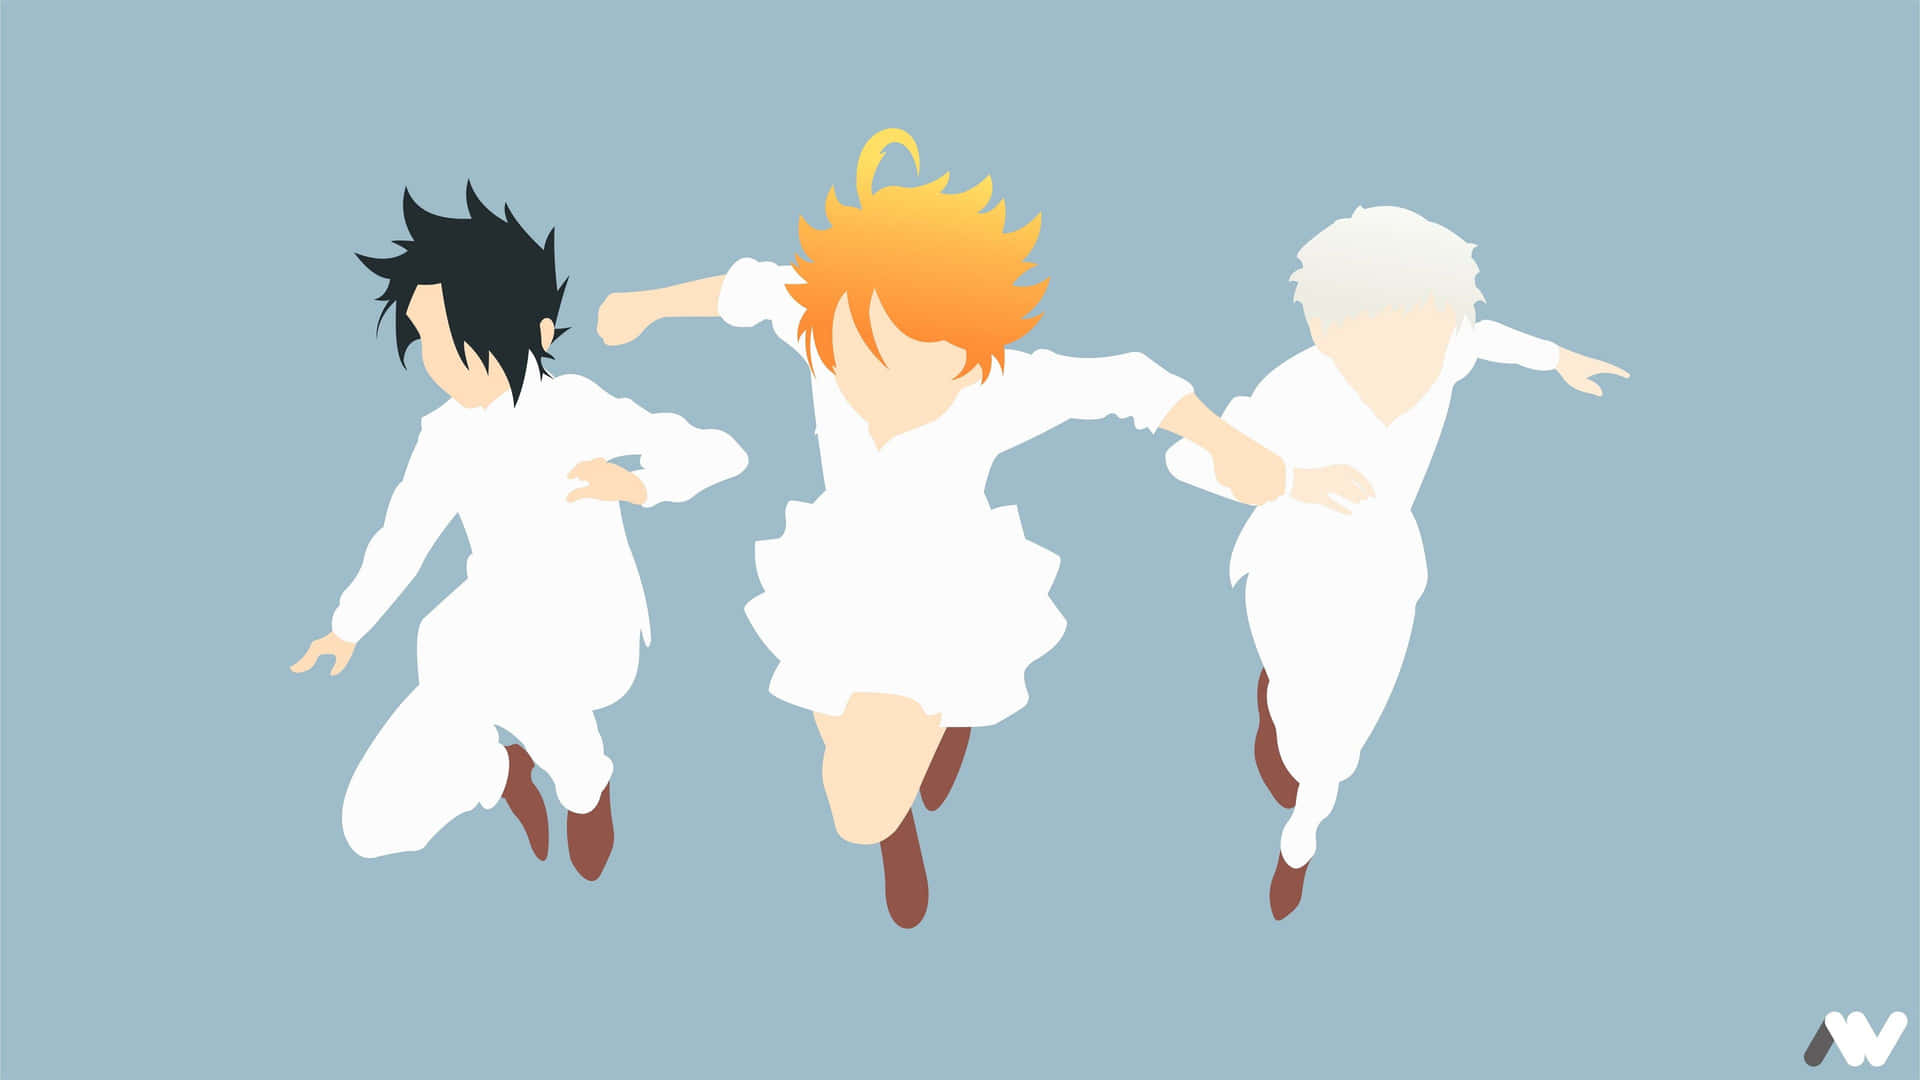 Emma, Ray and Norman - The Three Heroes of The Promised Neverland Wallpaper